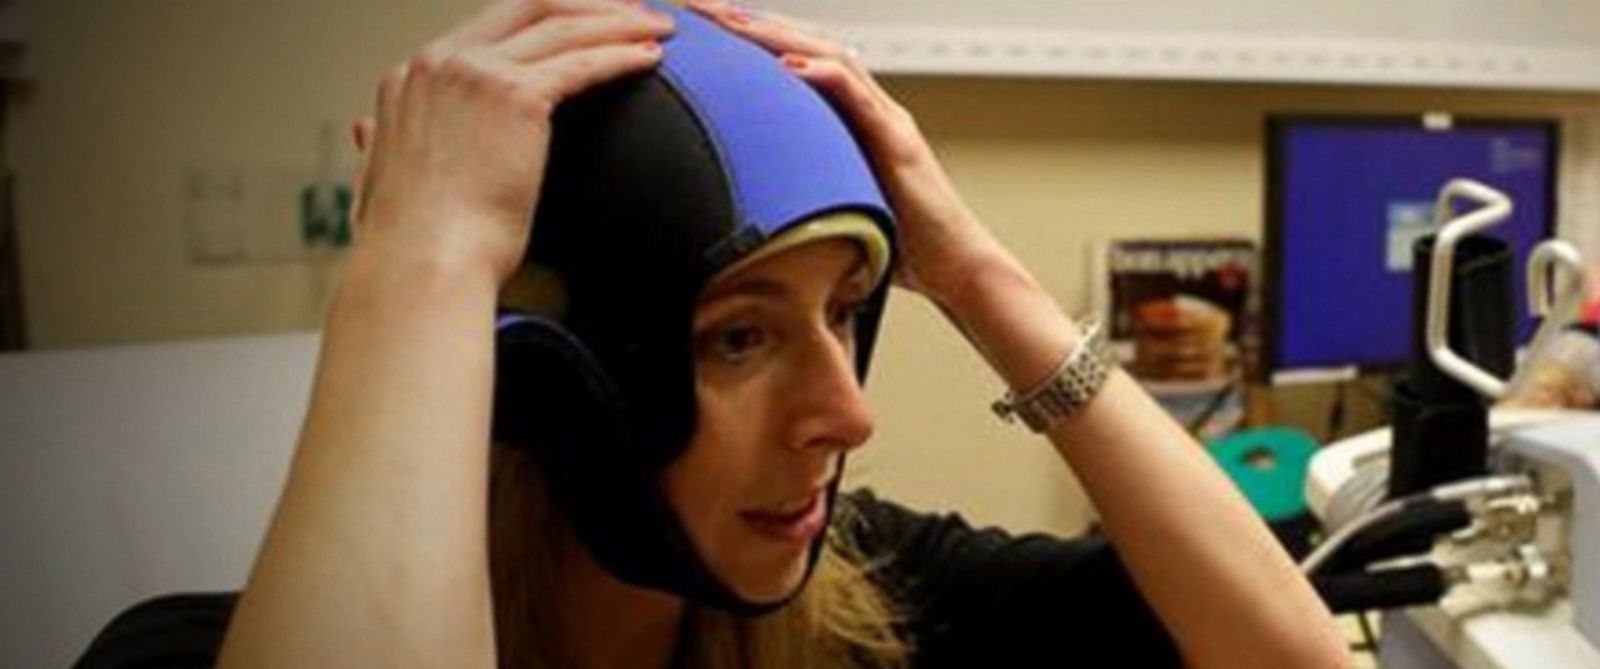 PHOTO: FDA clears cooling cap to save hair during chemotherapy.